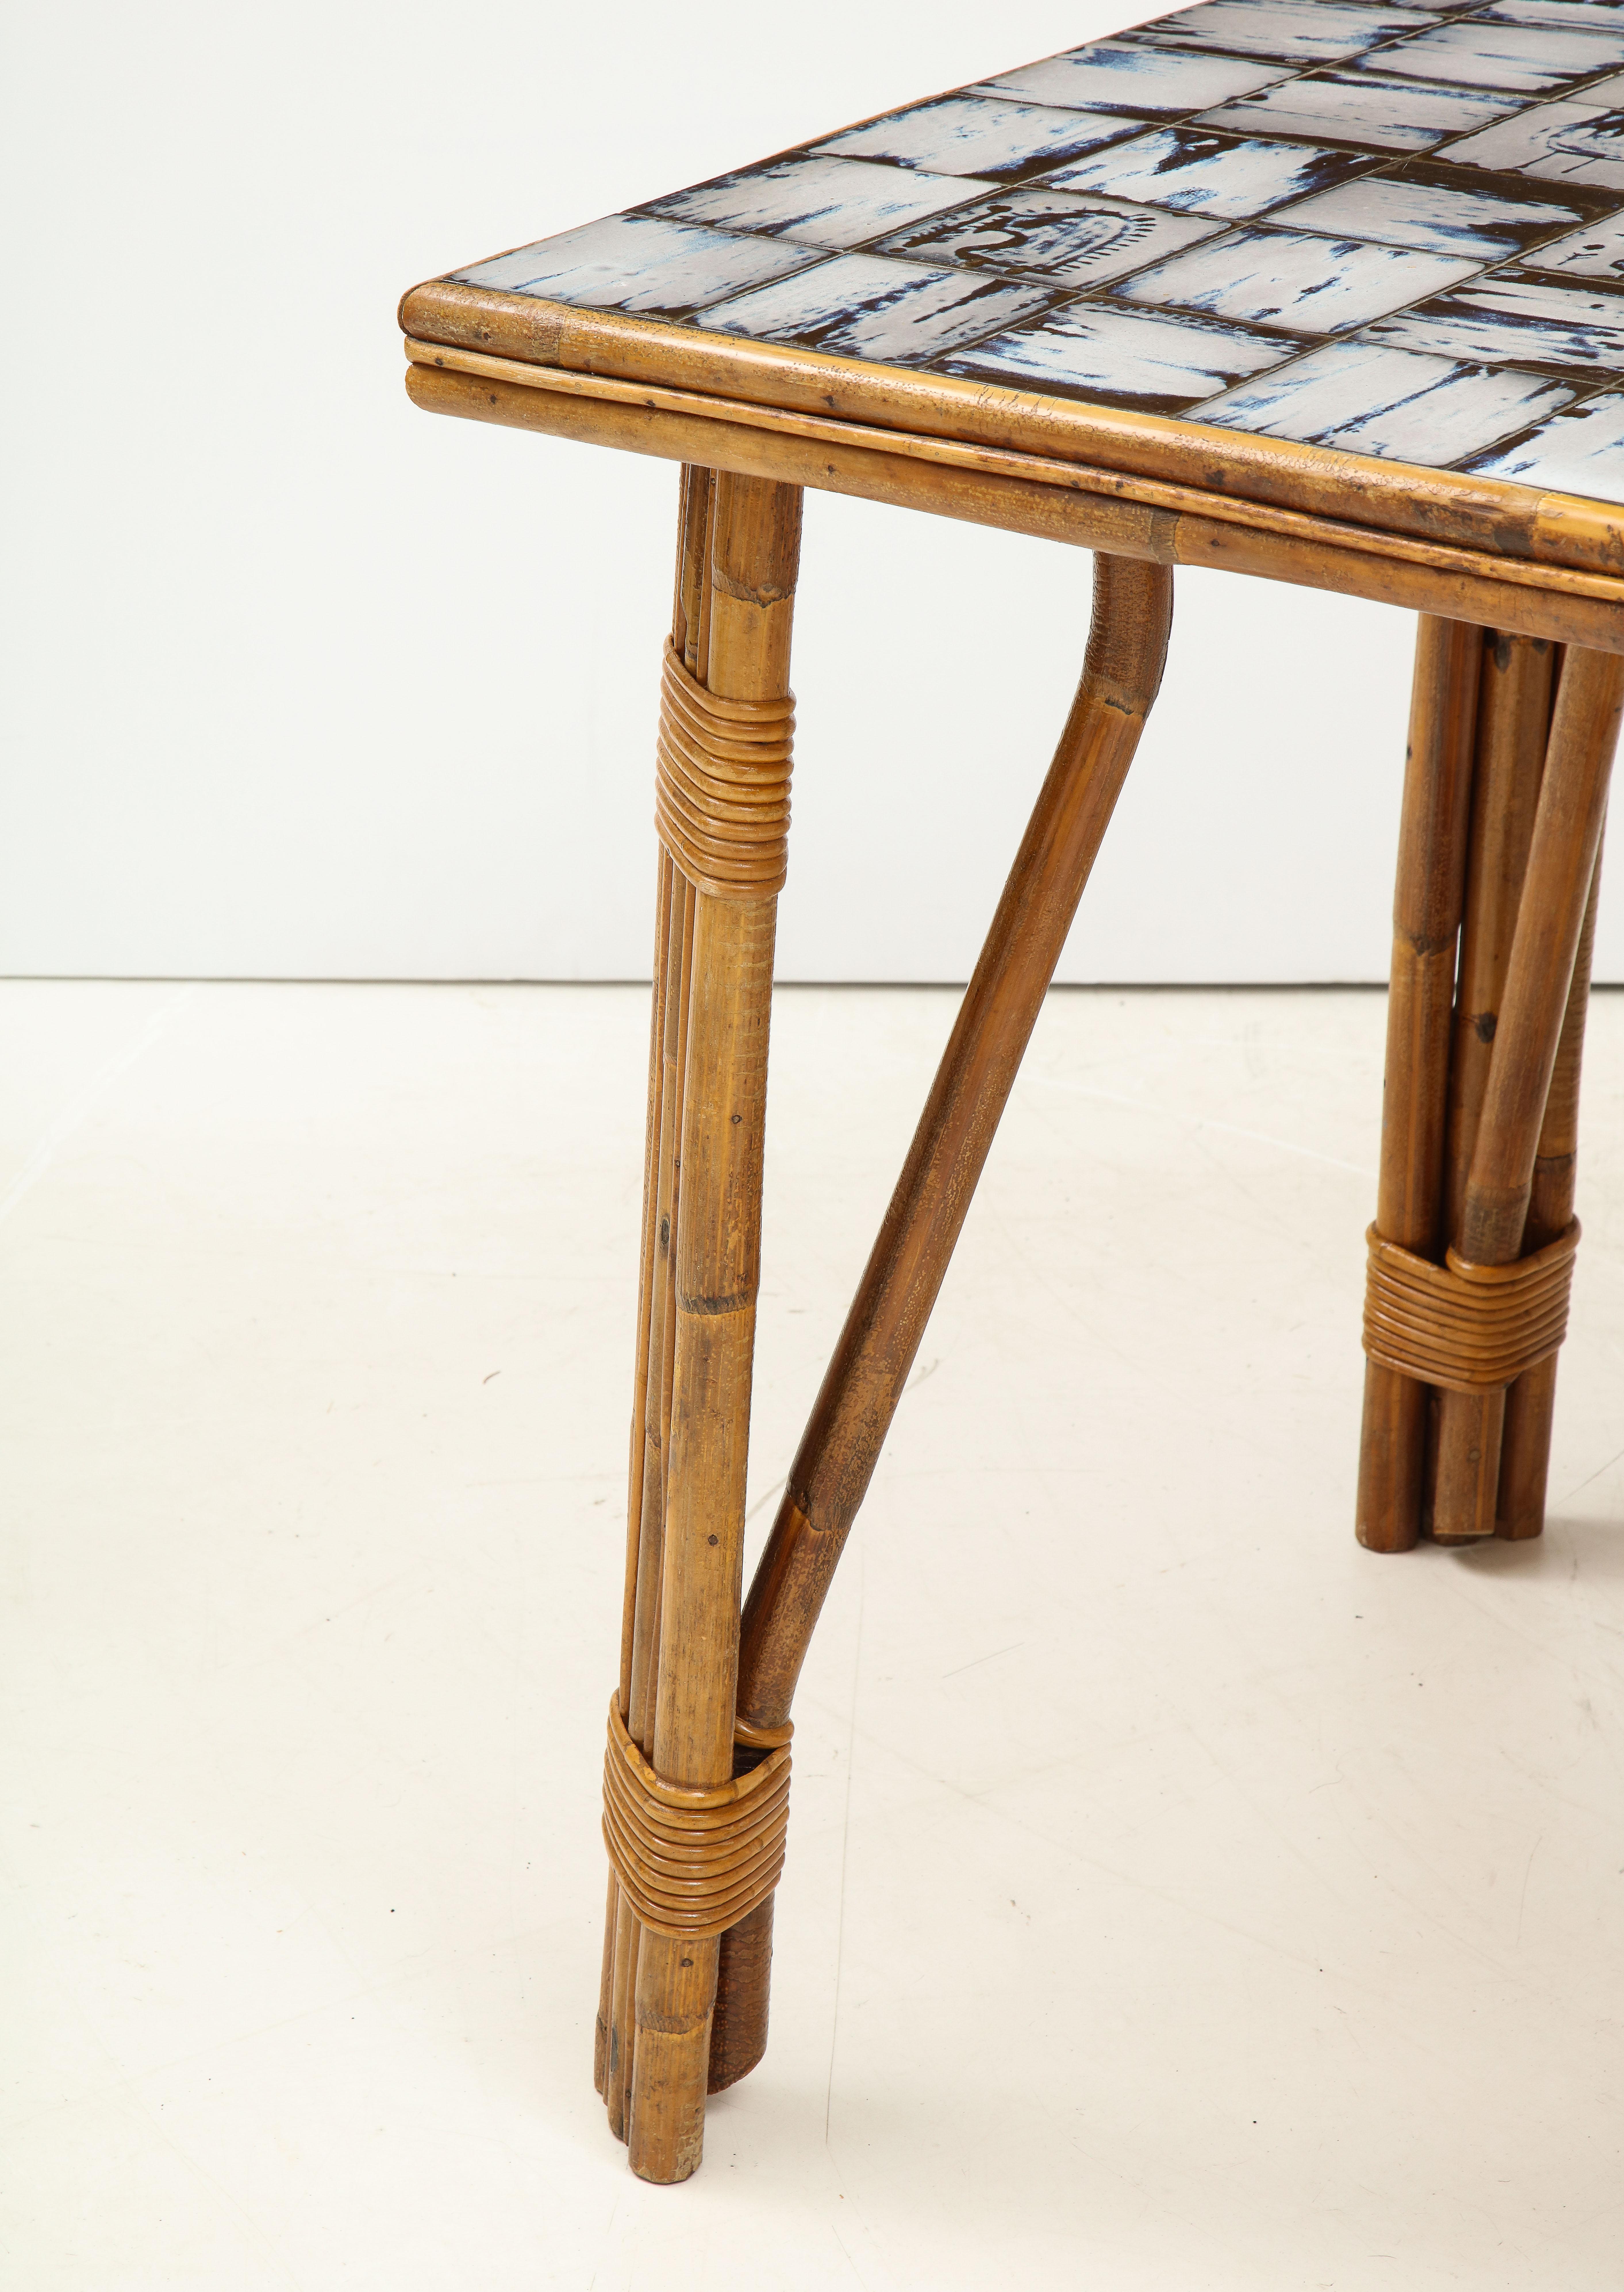 Rattan Dining Table with Hand-Painted Ceramic Tile Top, France, circa 1950 4